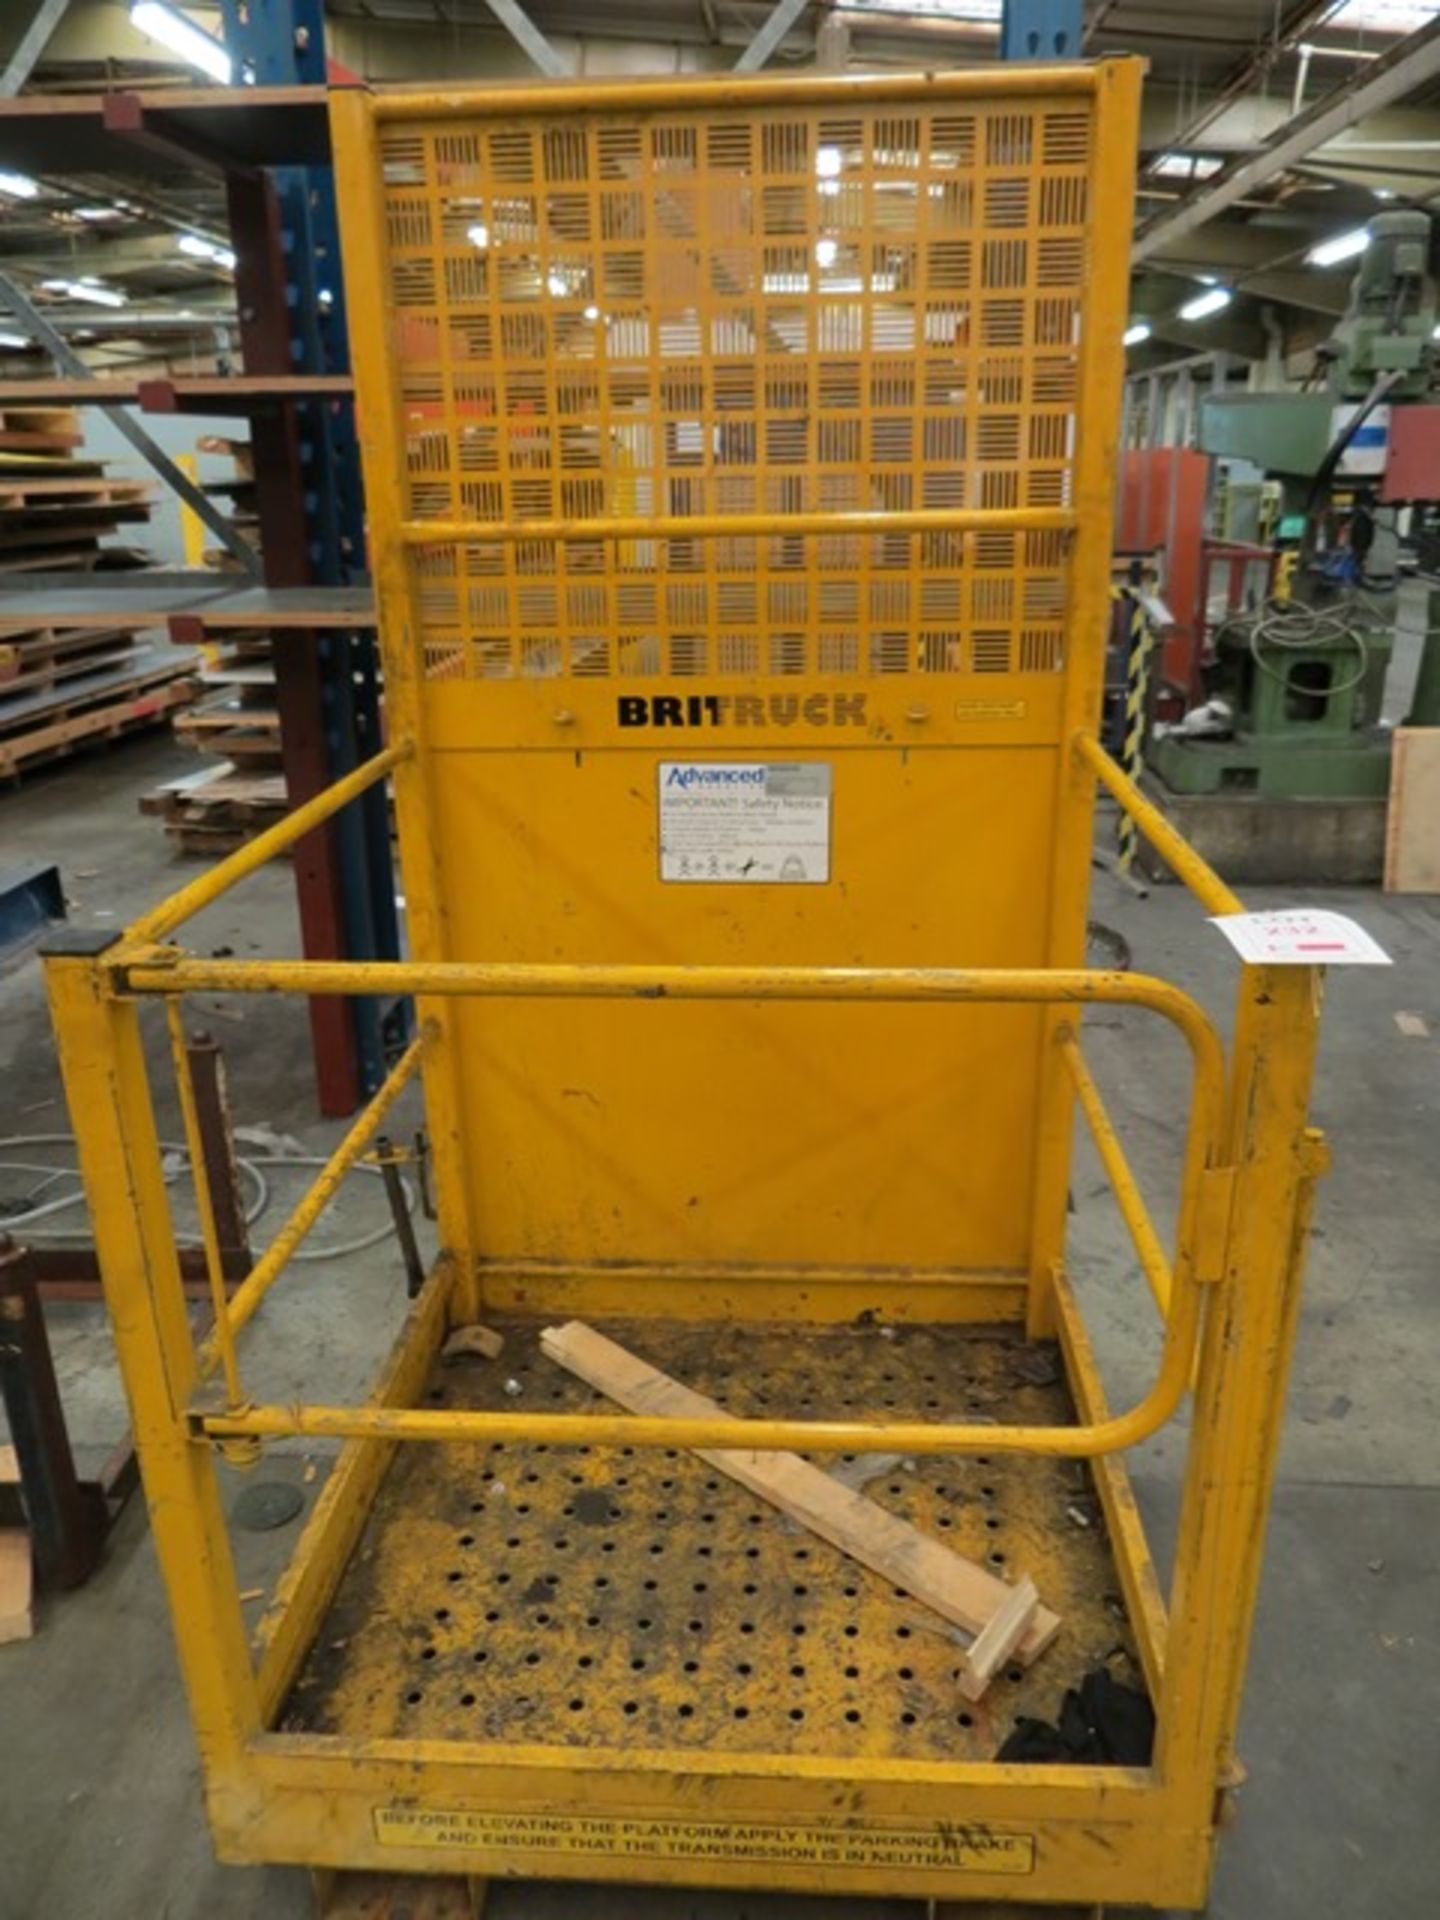 Britruck Forklift Man cage. Internal dimensions are 900mm (L) x 950mm (W) x 1000mm (H). NB: This